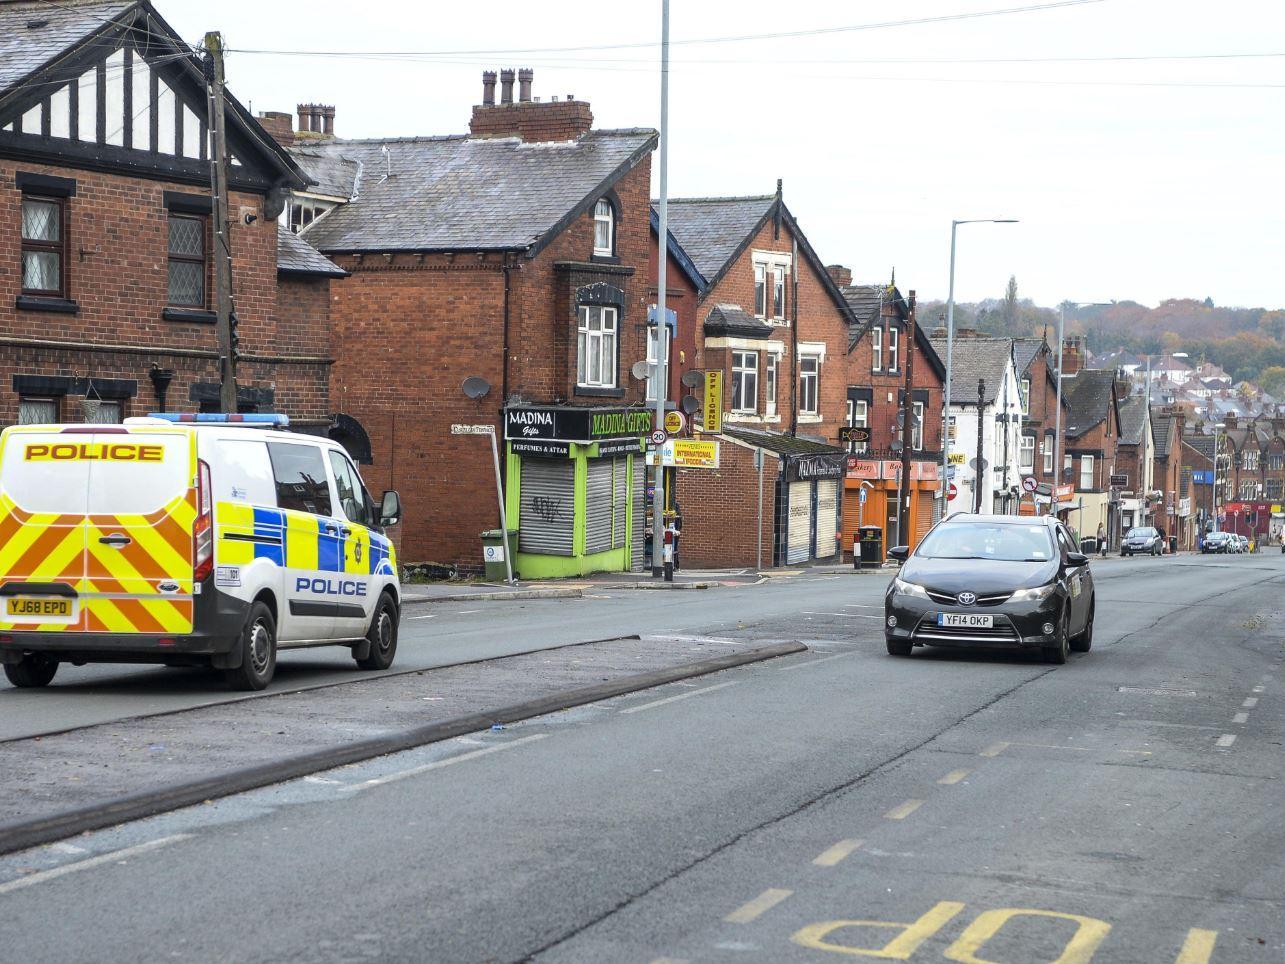 There were 326 anti-social behaviour crimes reported in and around the Harehills area in December 2019